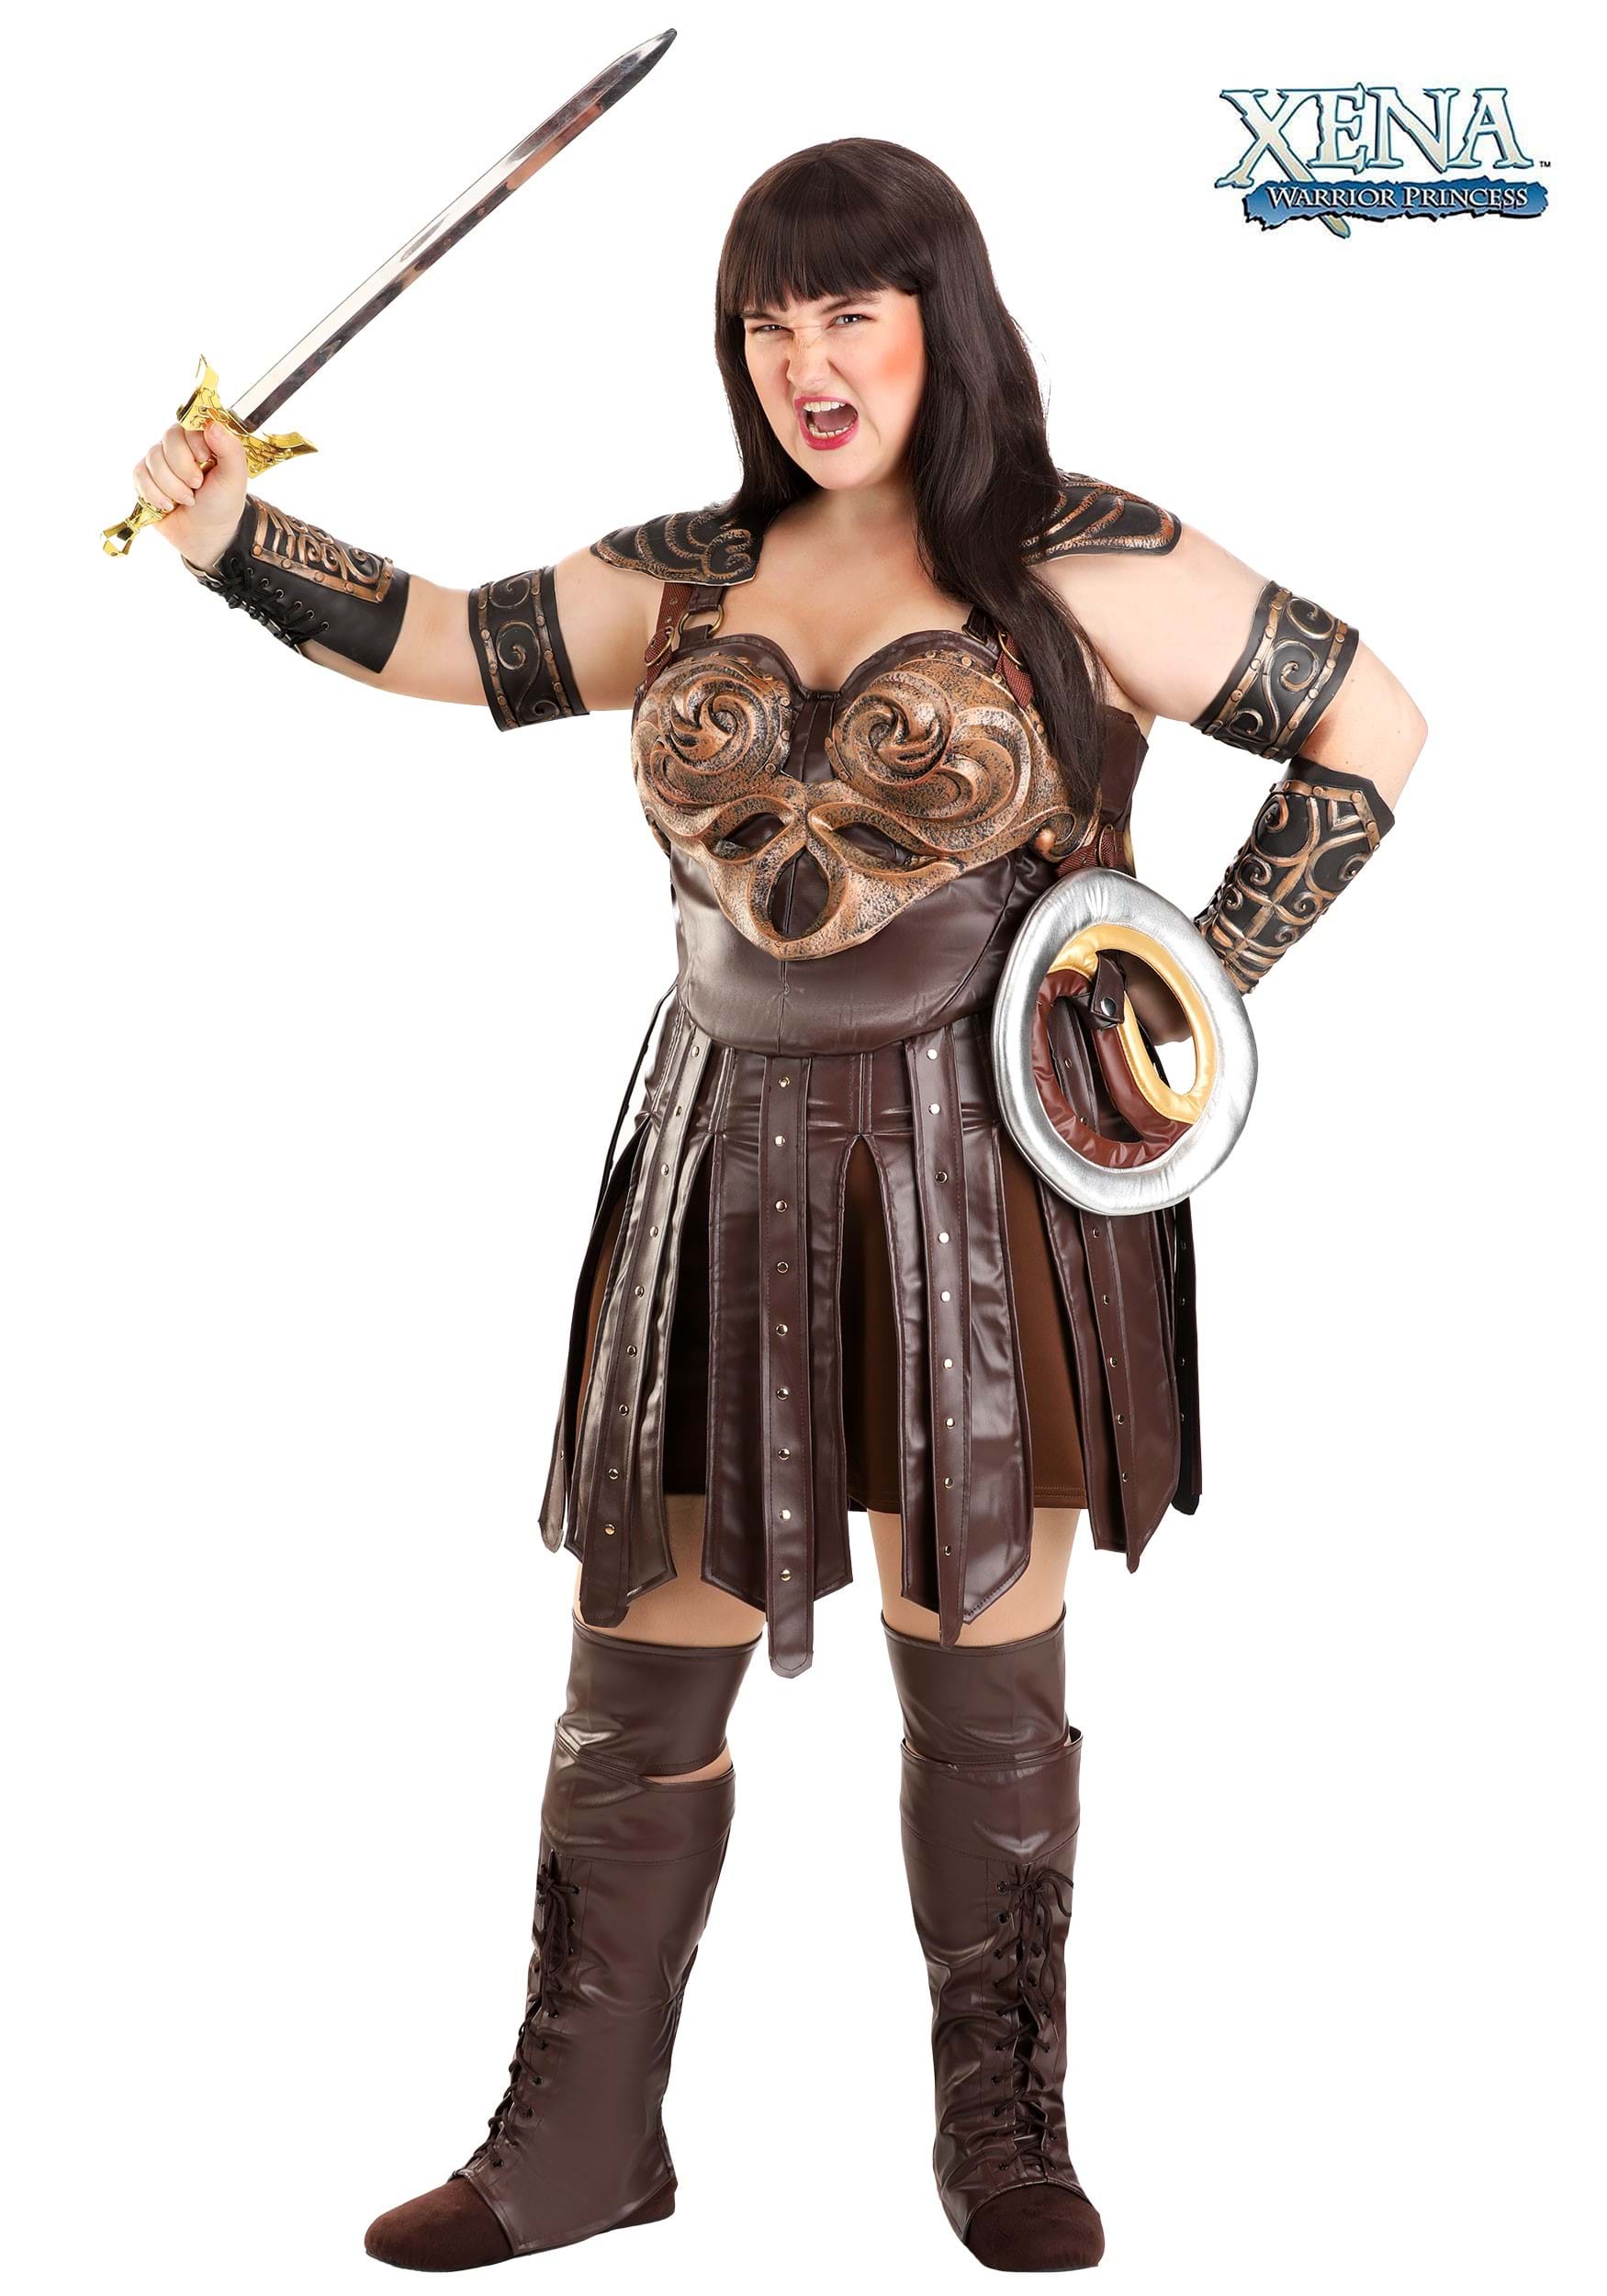 denise hammann recommends xena warrior princess pictures pic